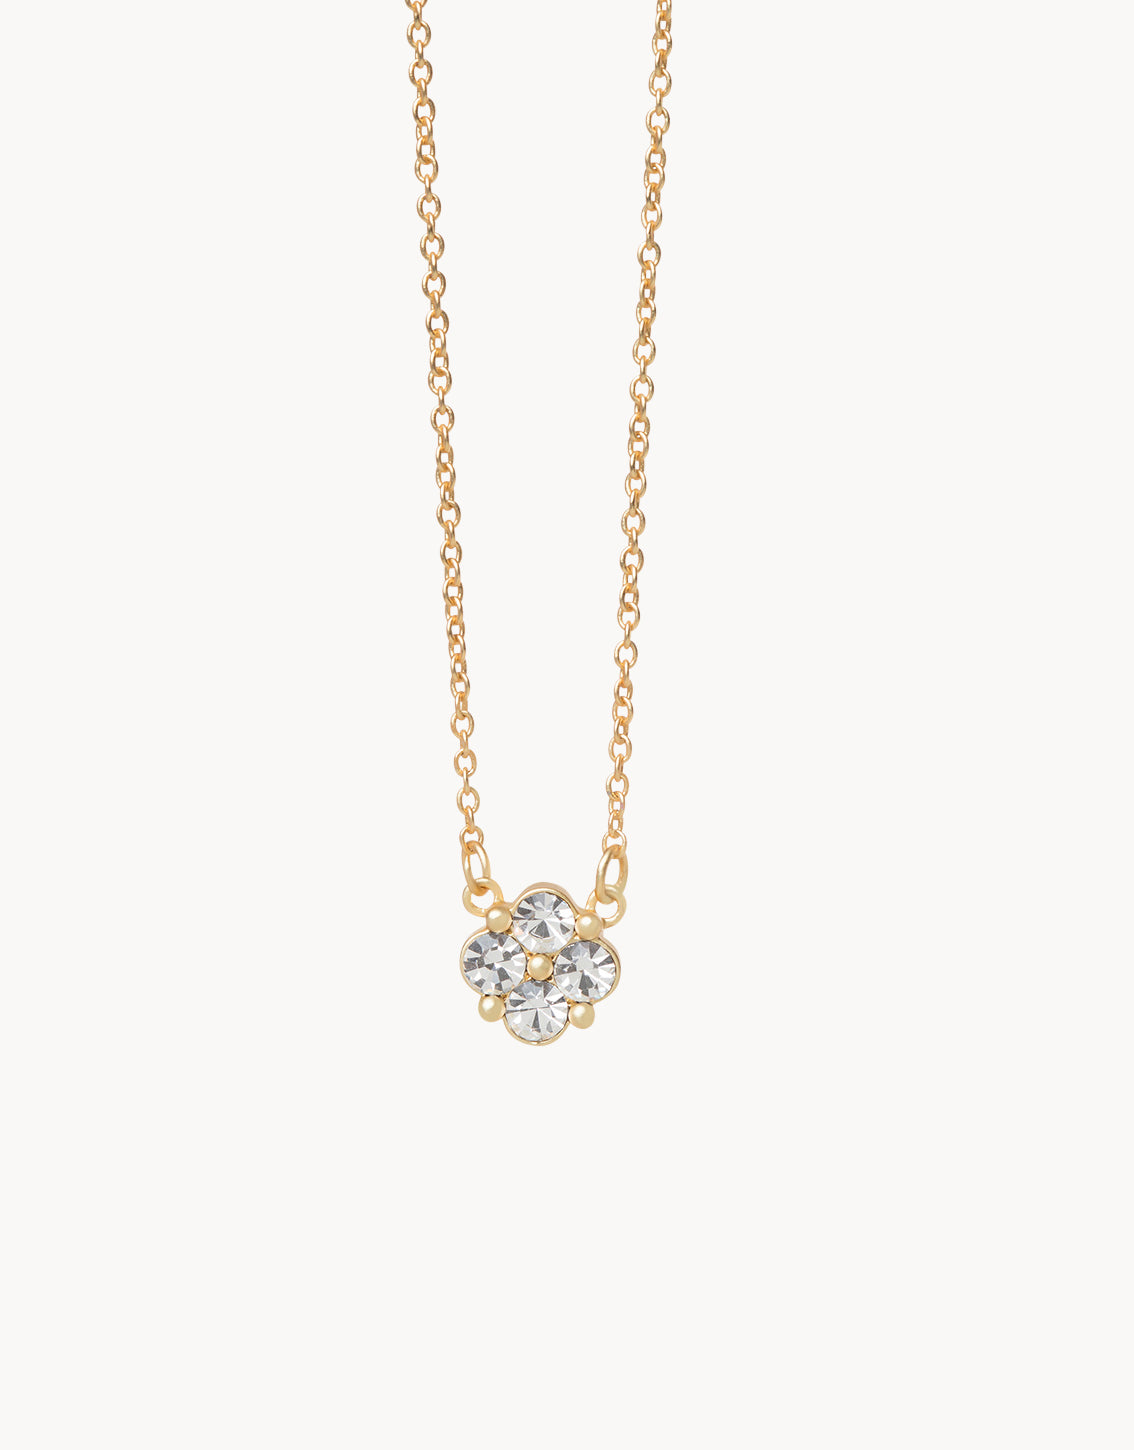 Spartina Sea La Vie Necklace Blessed Crystal Clover